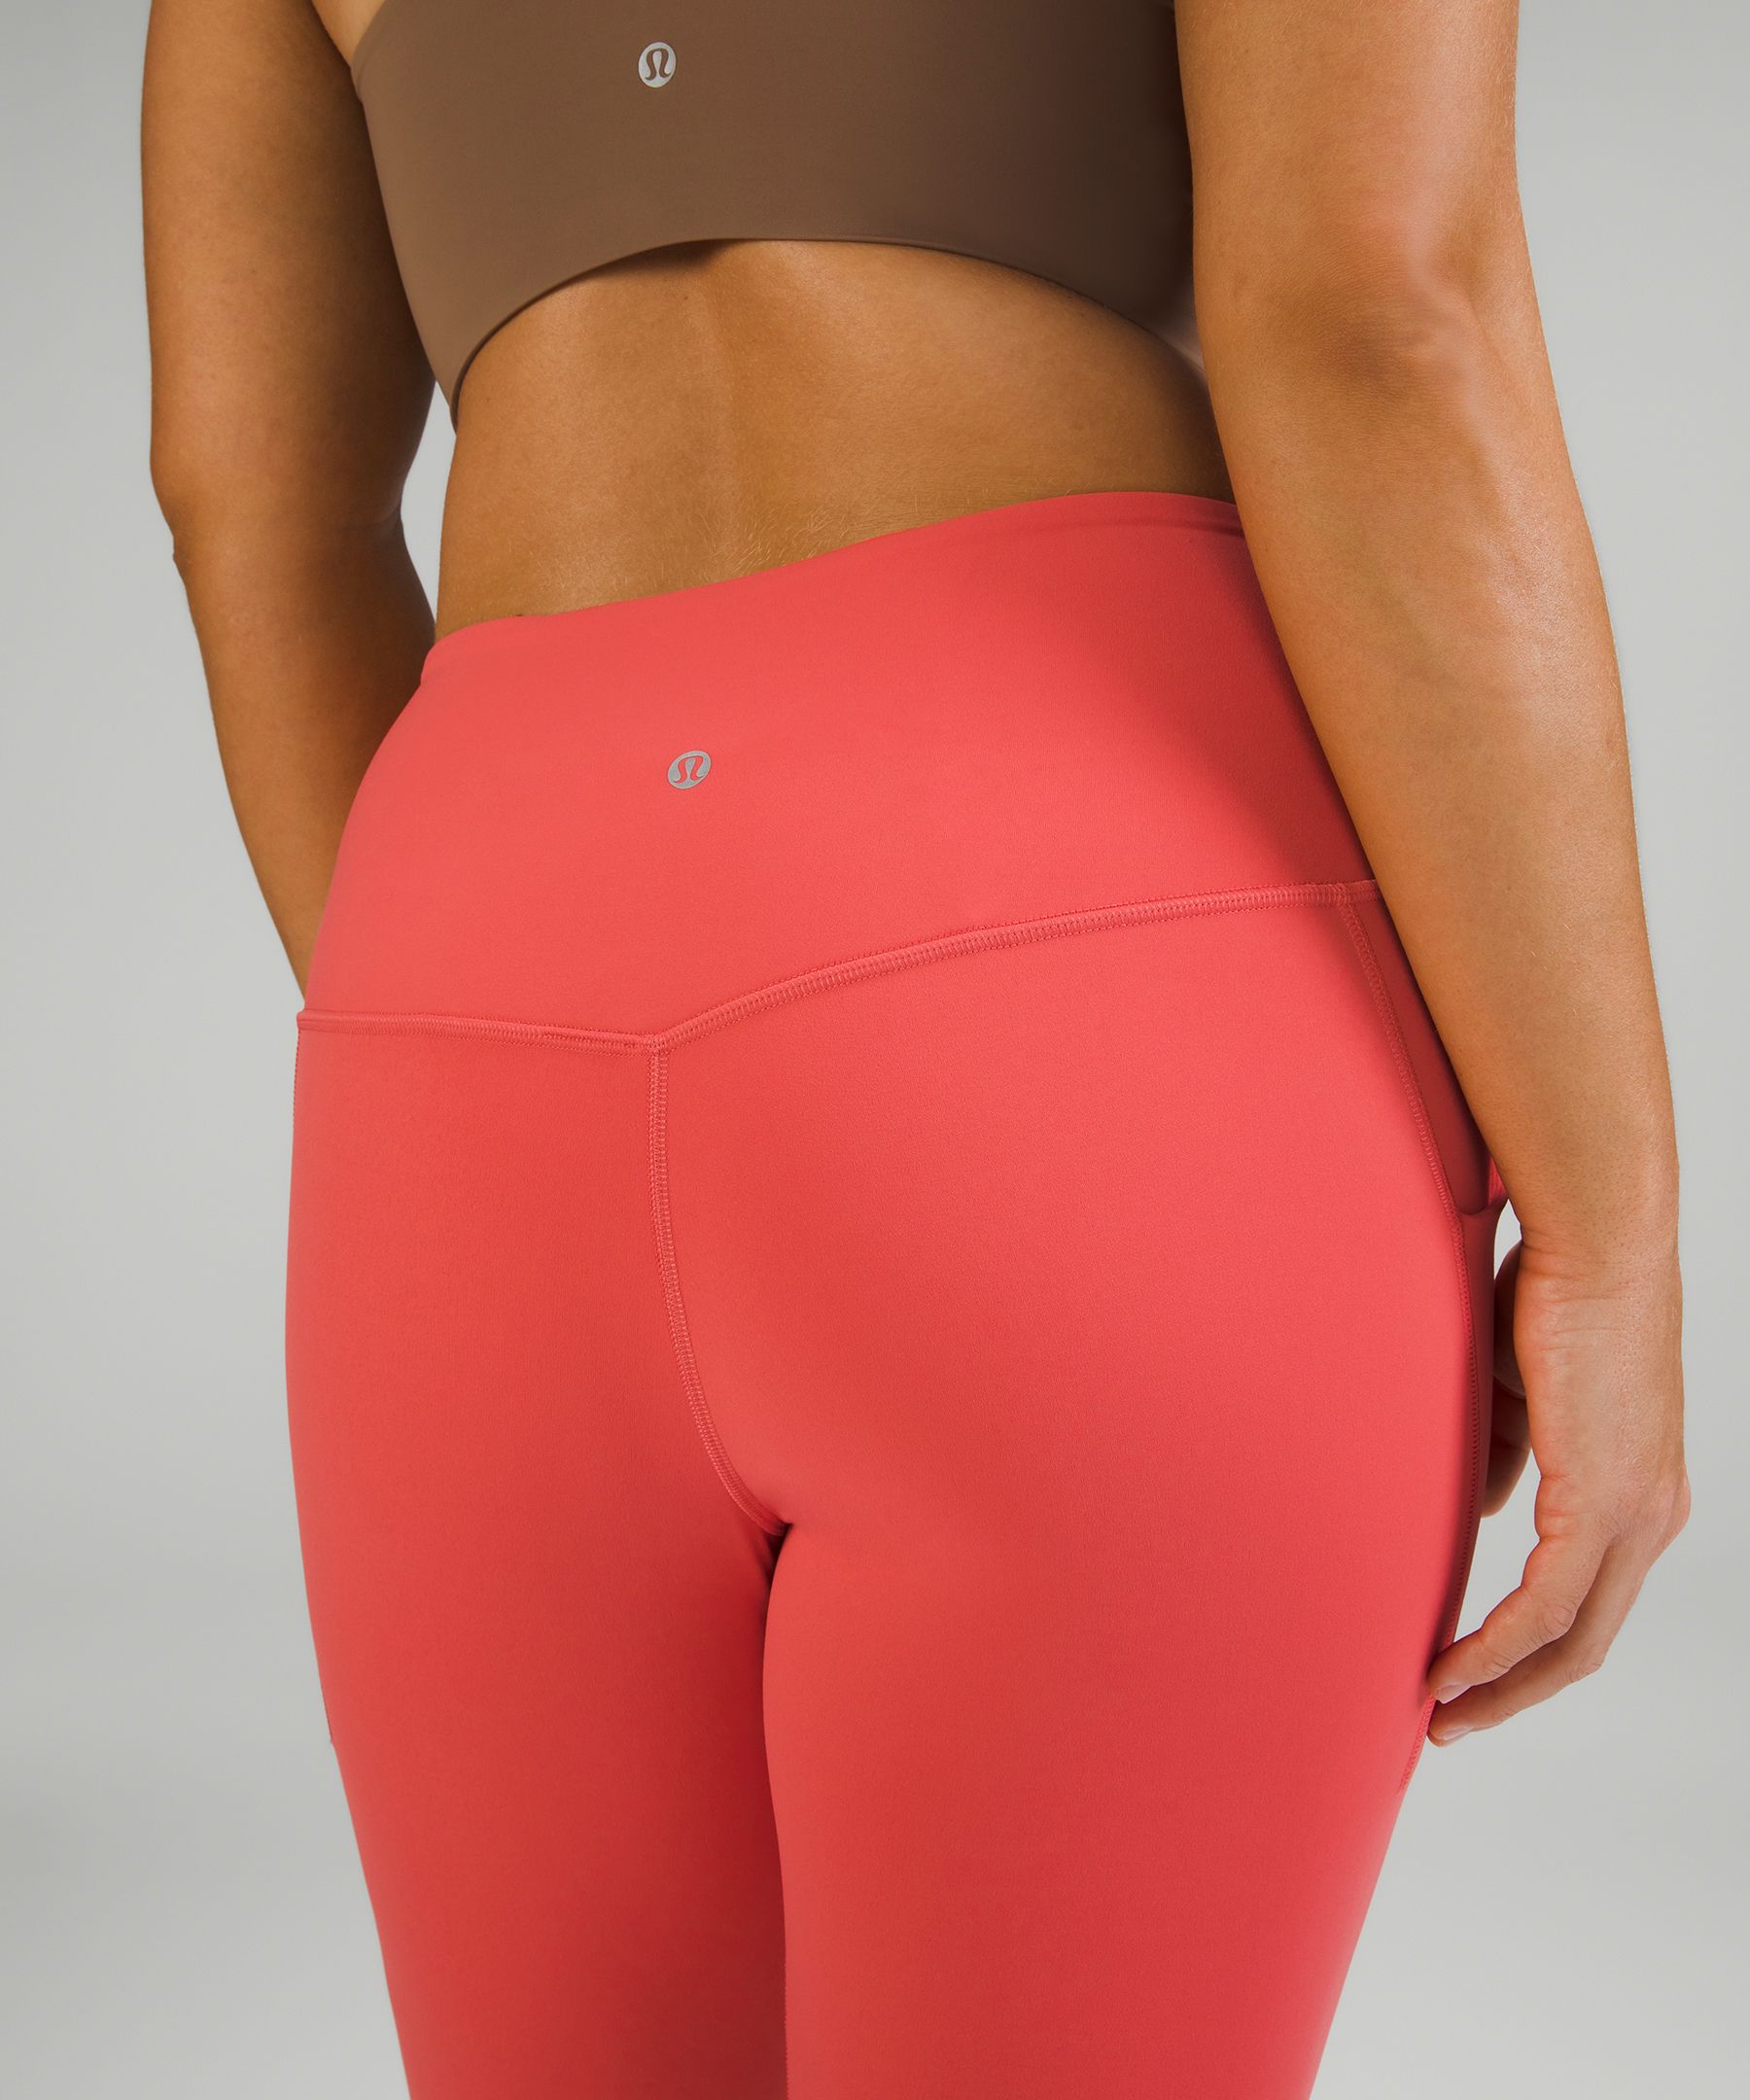 Lululemon Align High Rise Crop with Pockets 23 - Water Drop